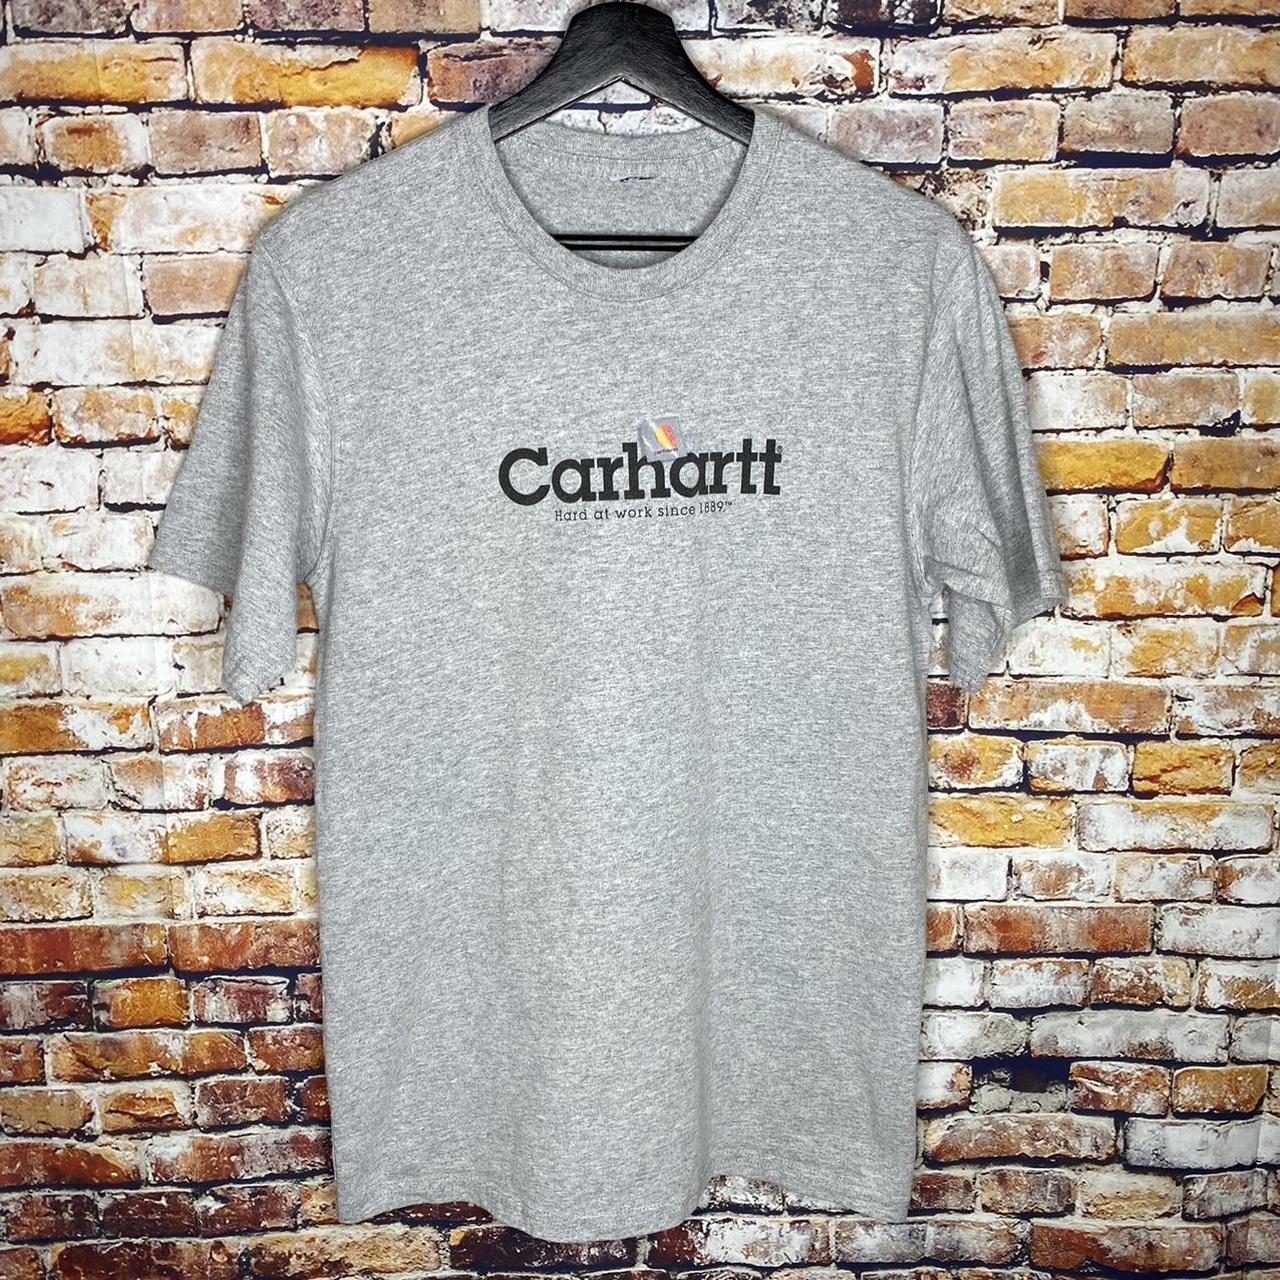 The best Carhartt T-shirts to wear this summer